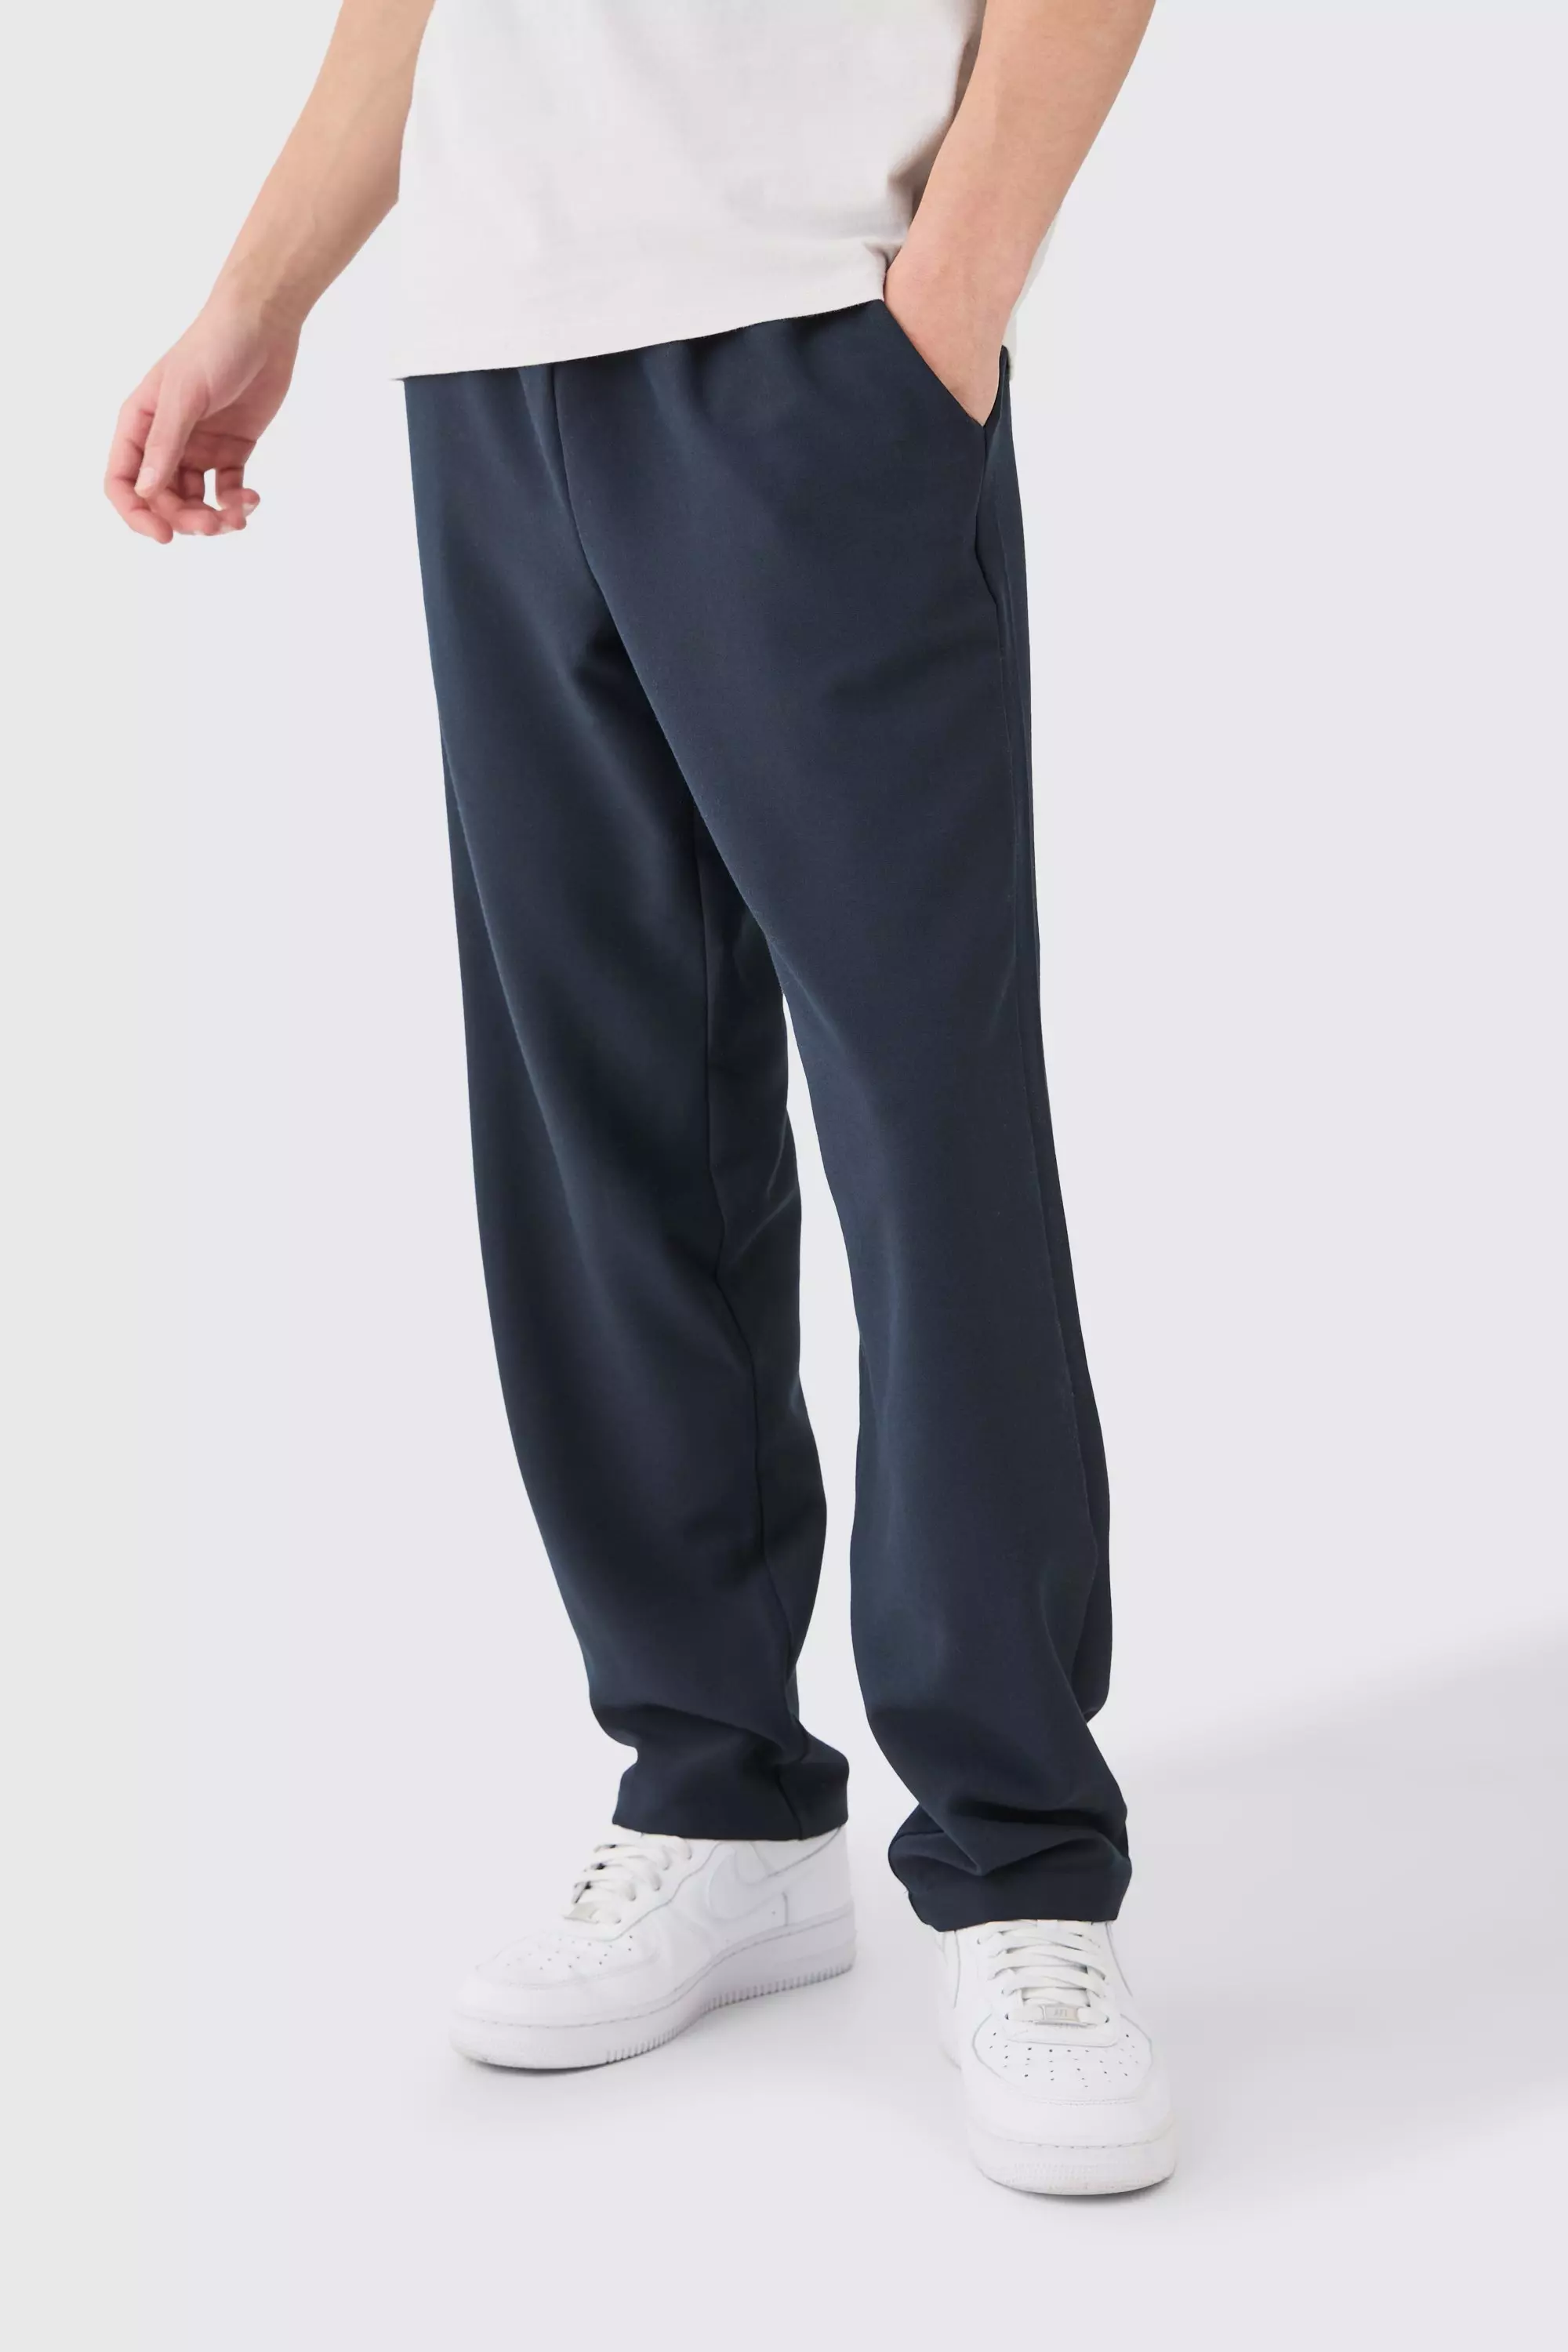 Navy Drawcord Waist Straight Trousers